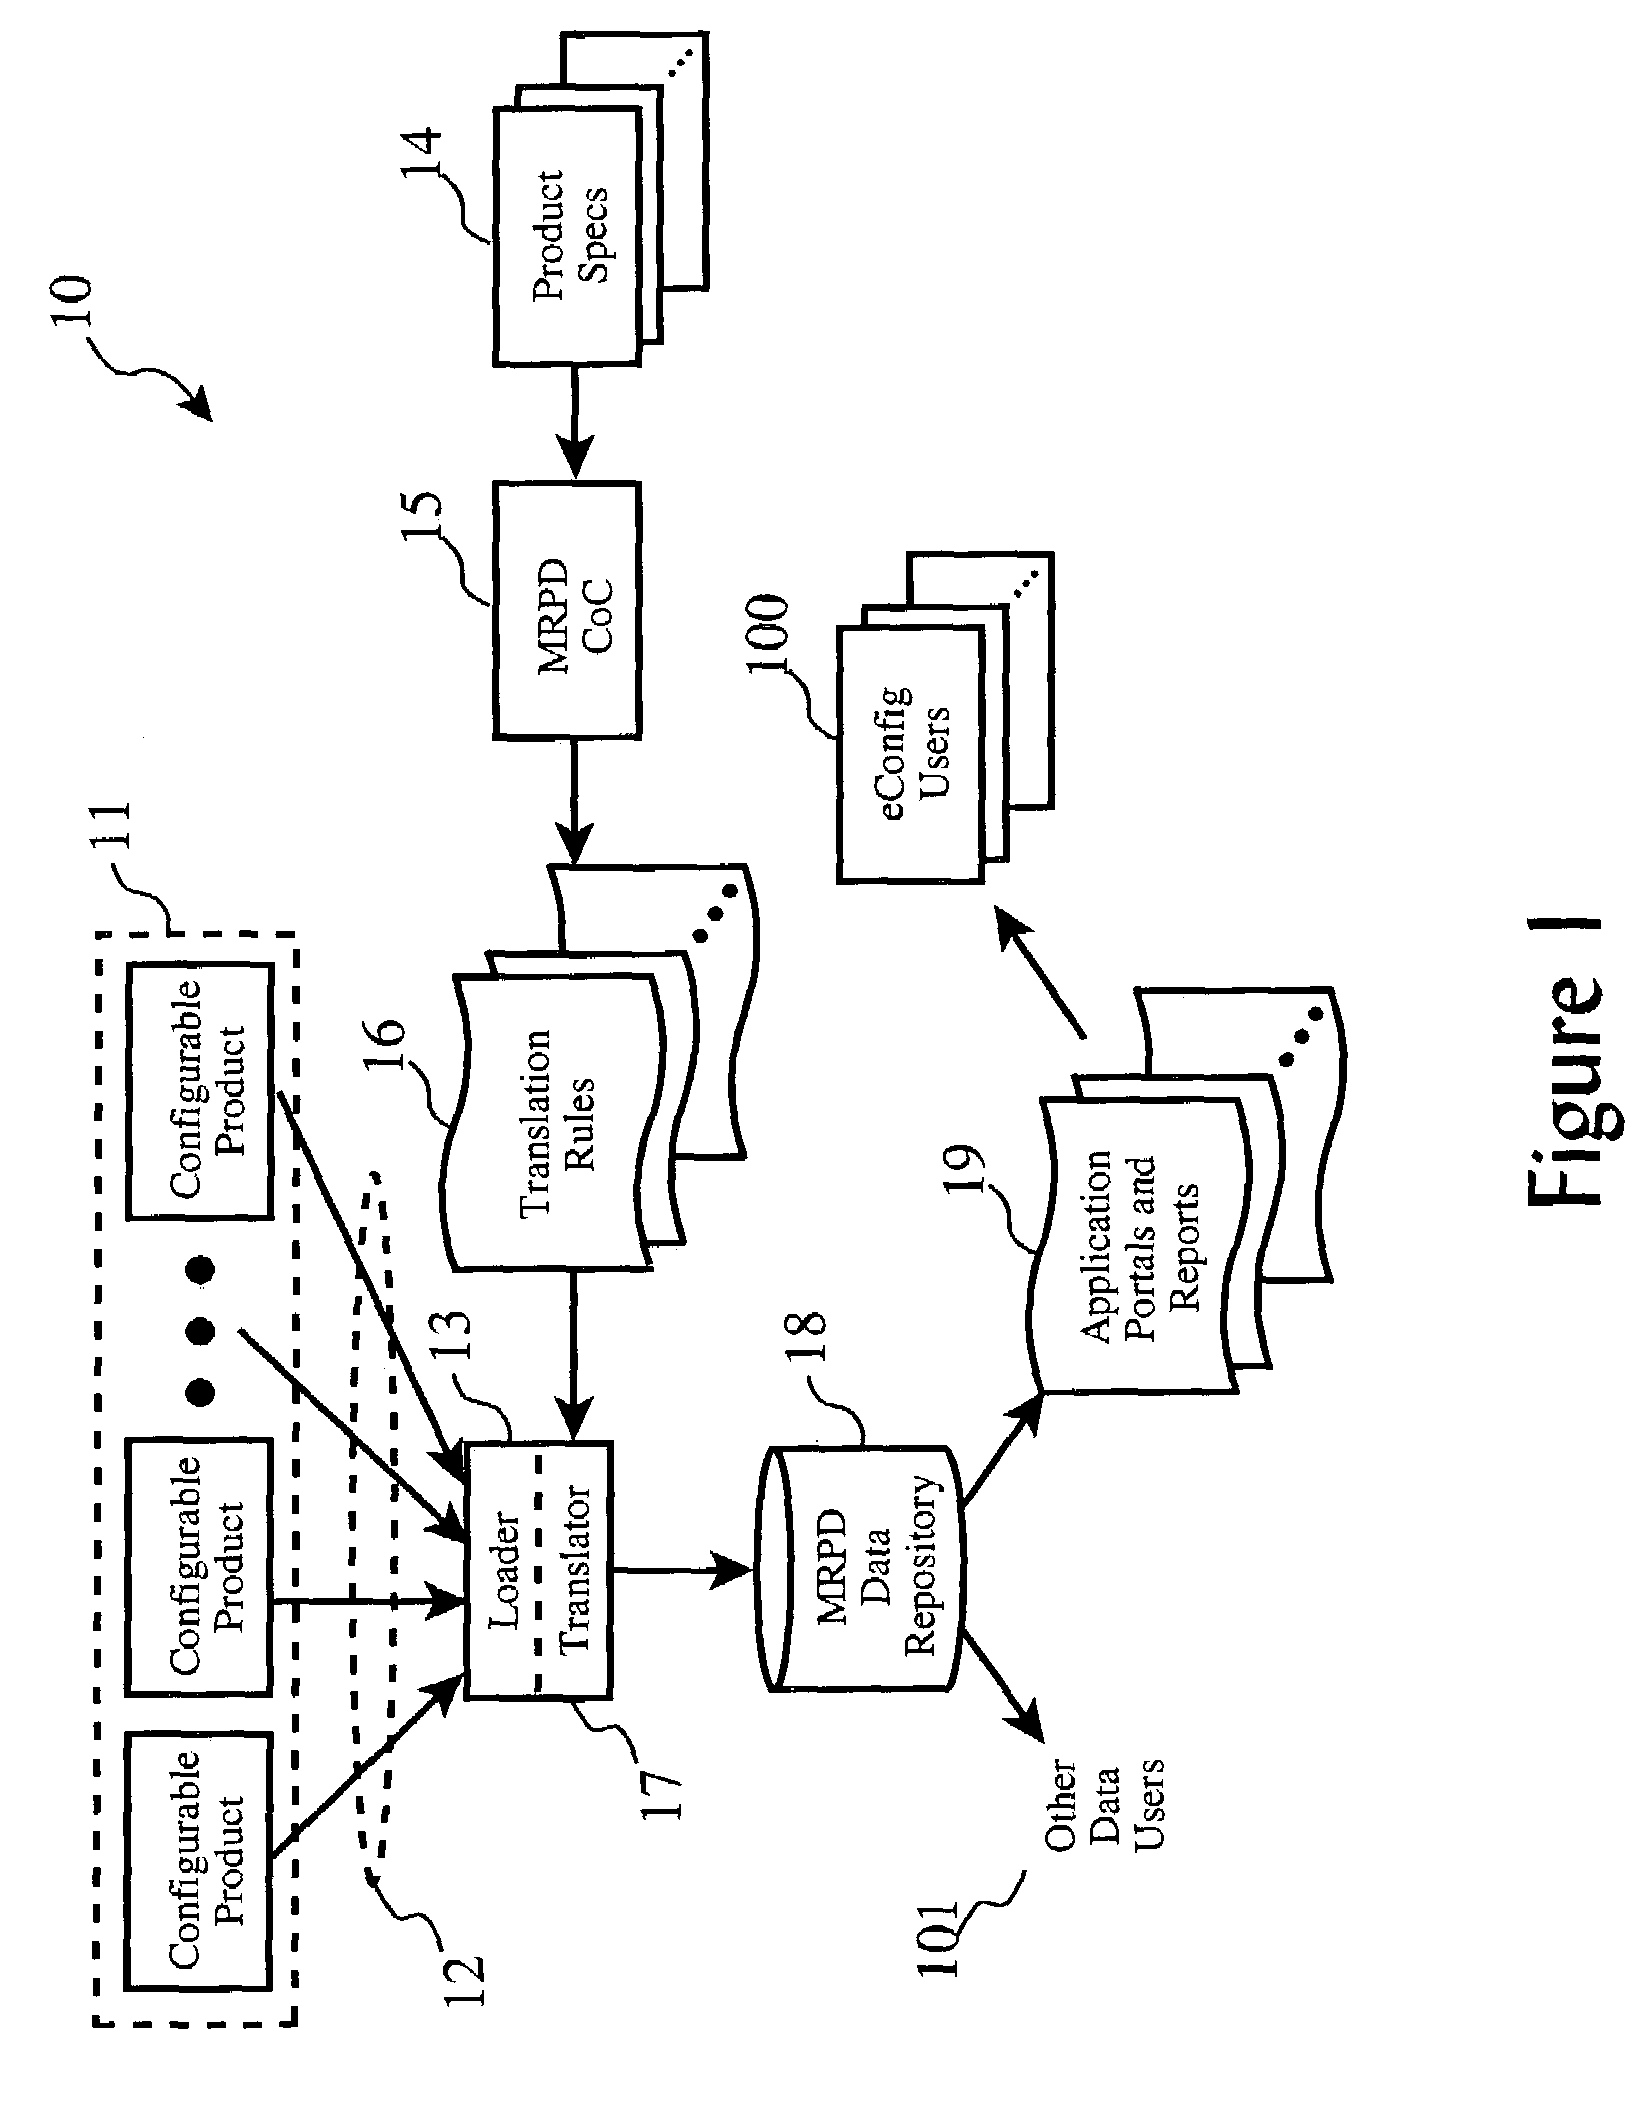 Method and system for reporting configuration data for queriable and non-queriable installed components